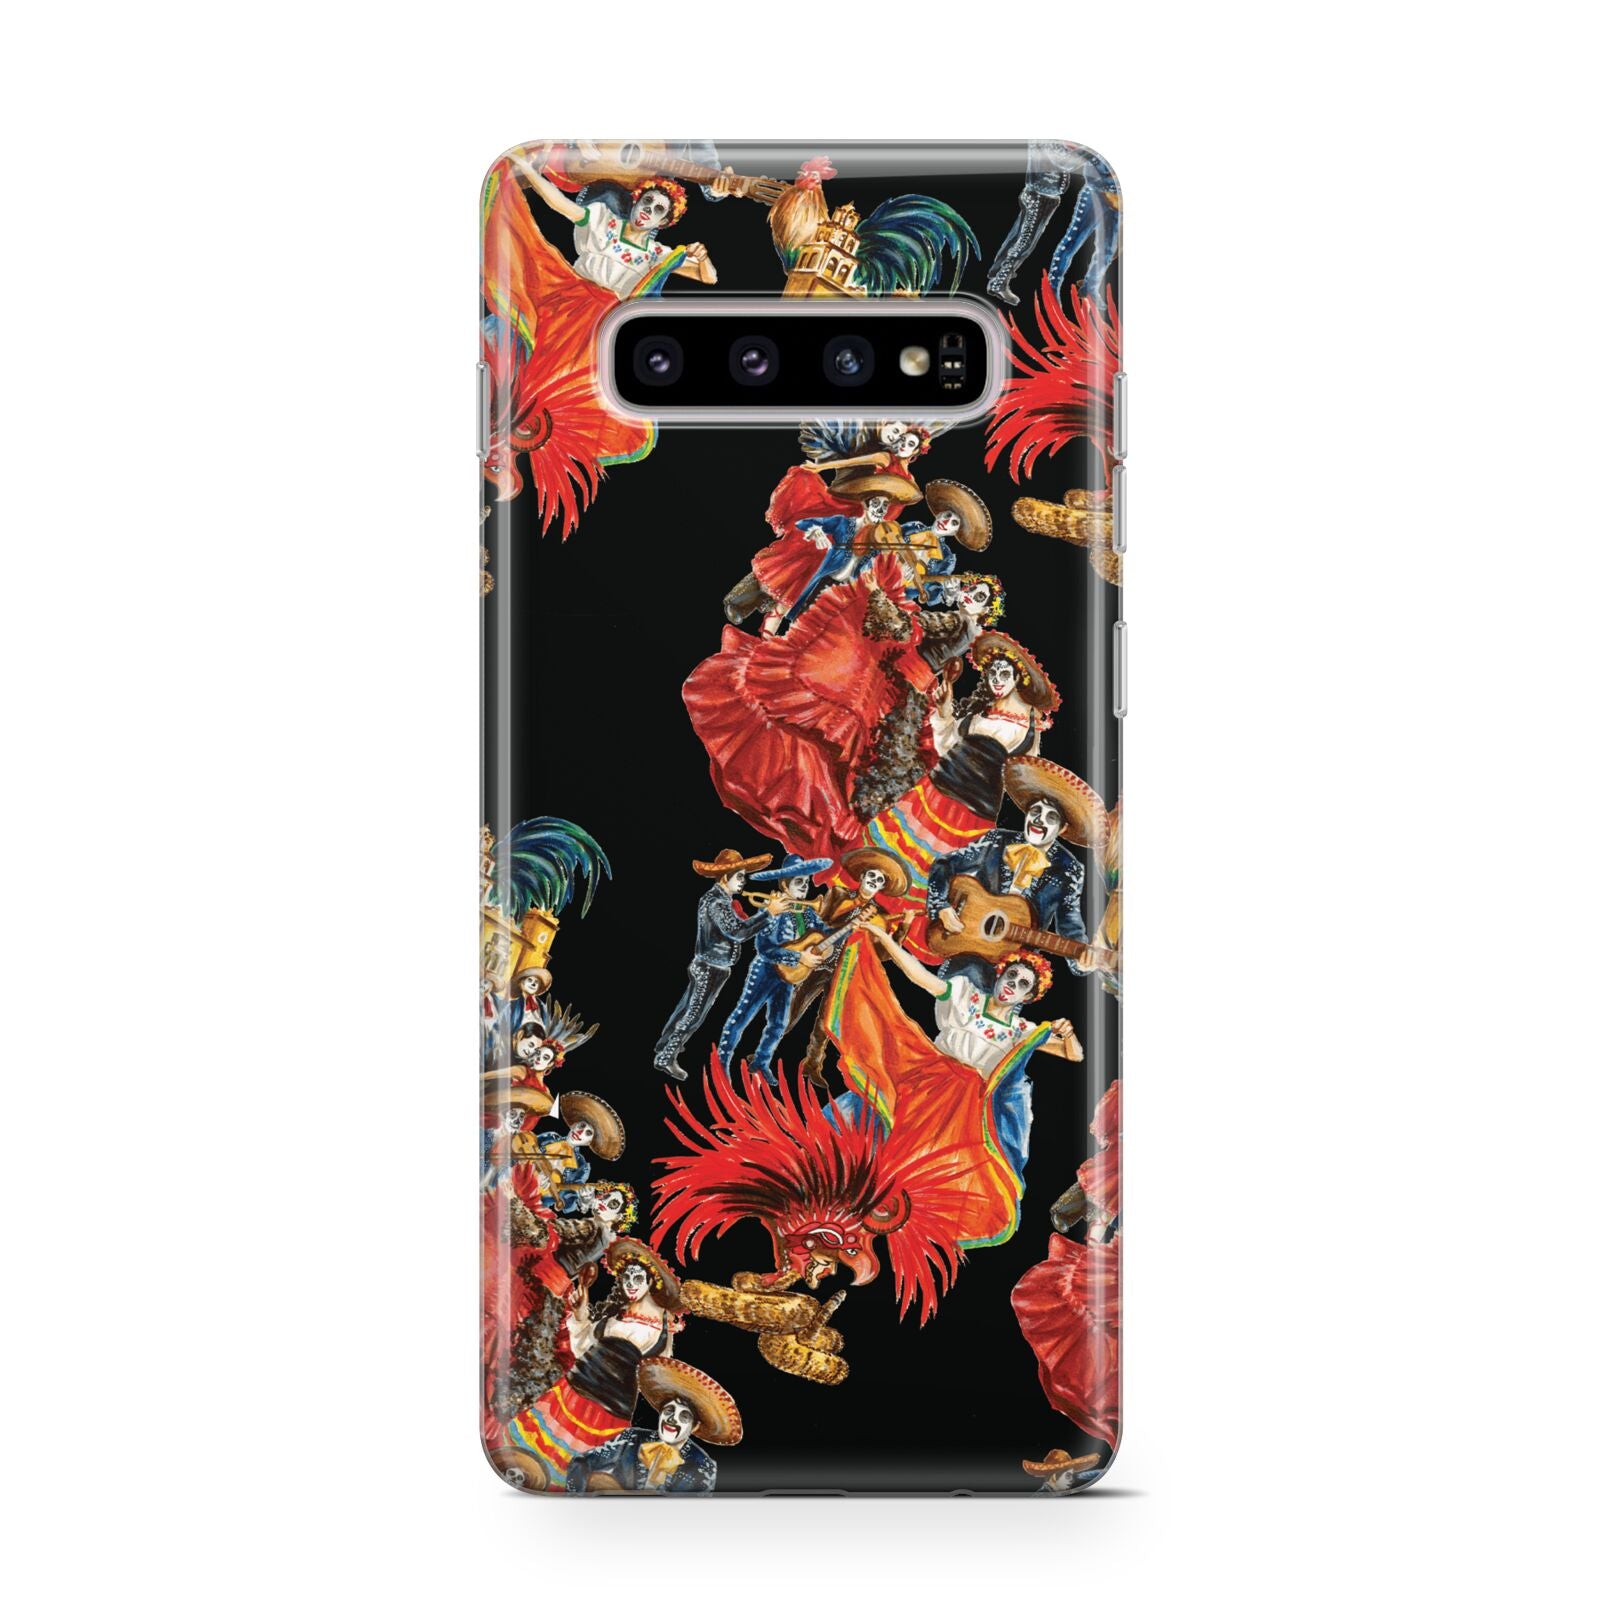 Day of the Dead Festival Protective Samsung Galaxy Case